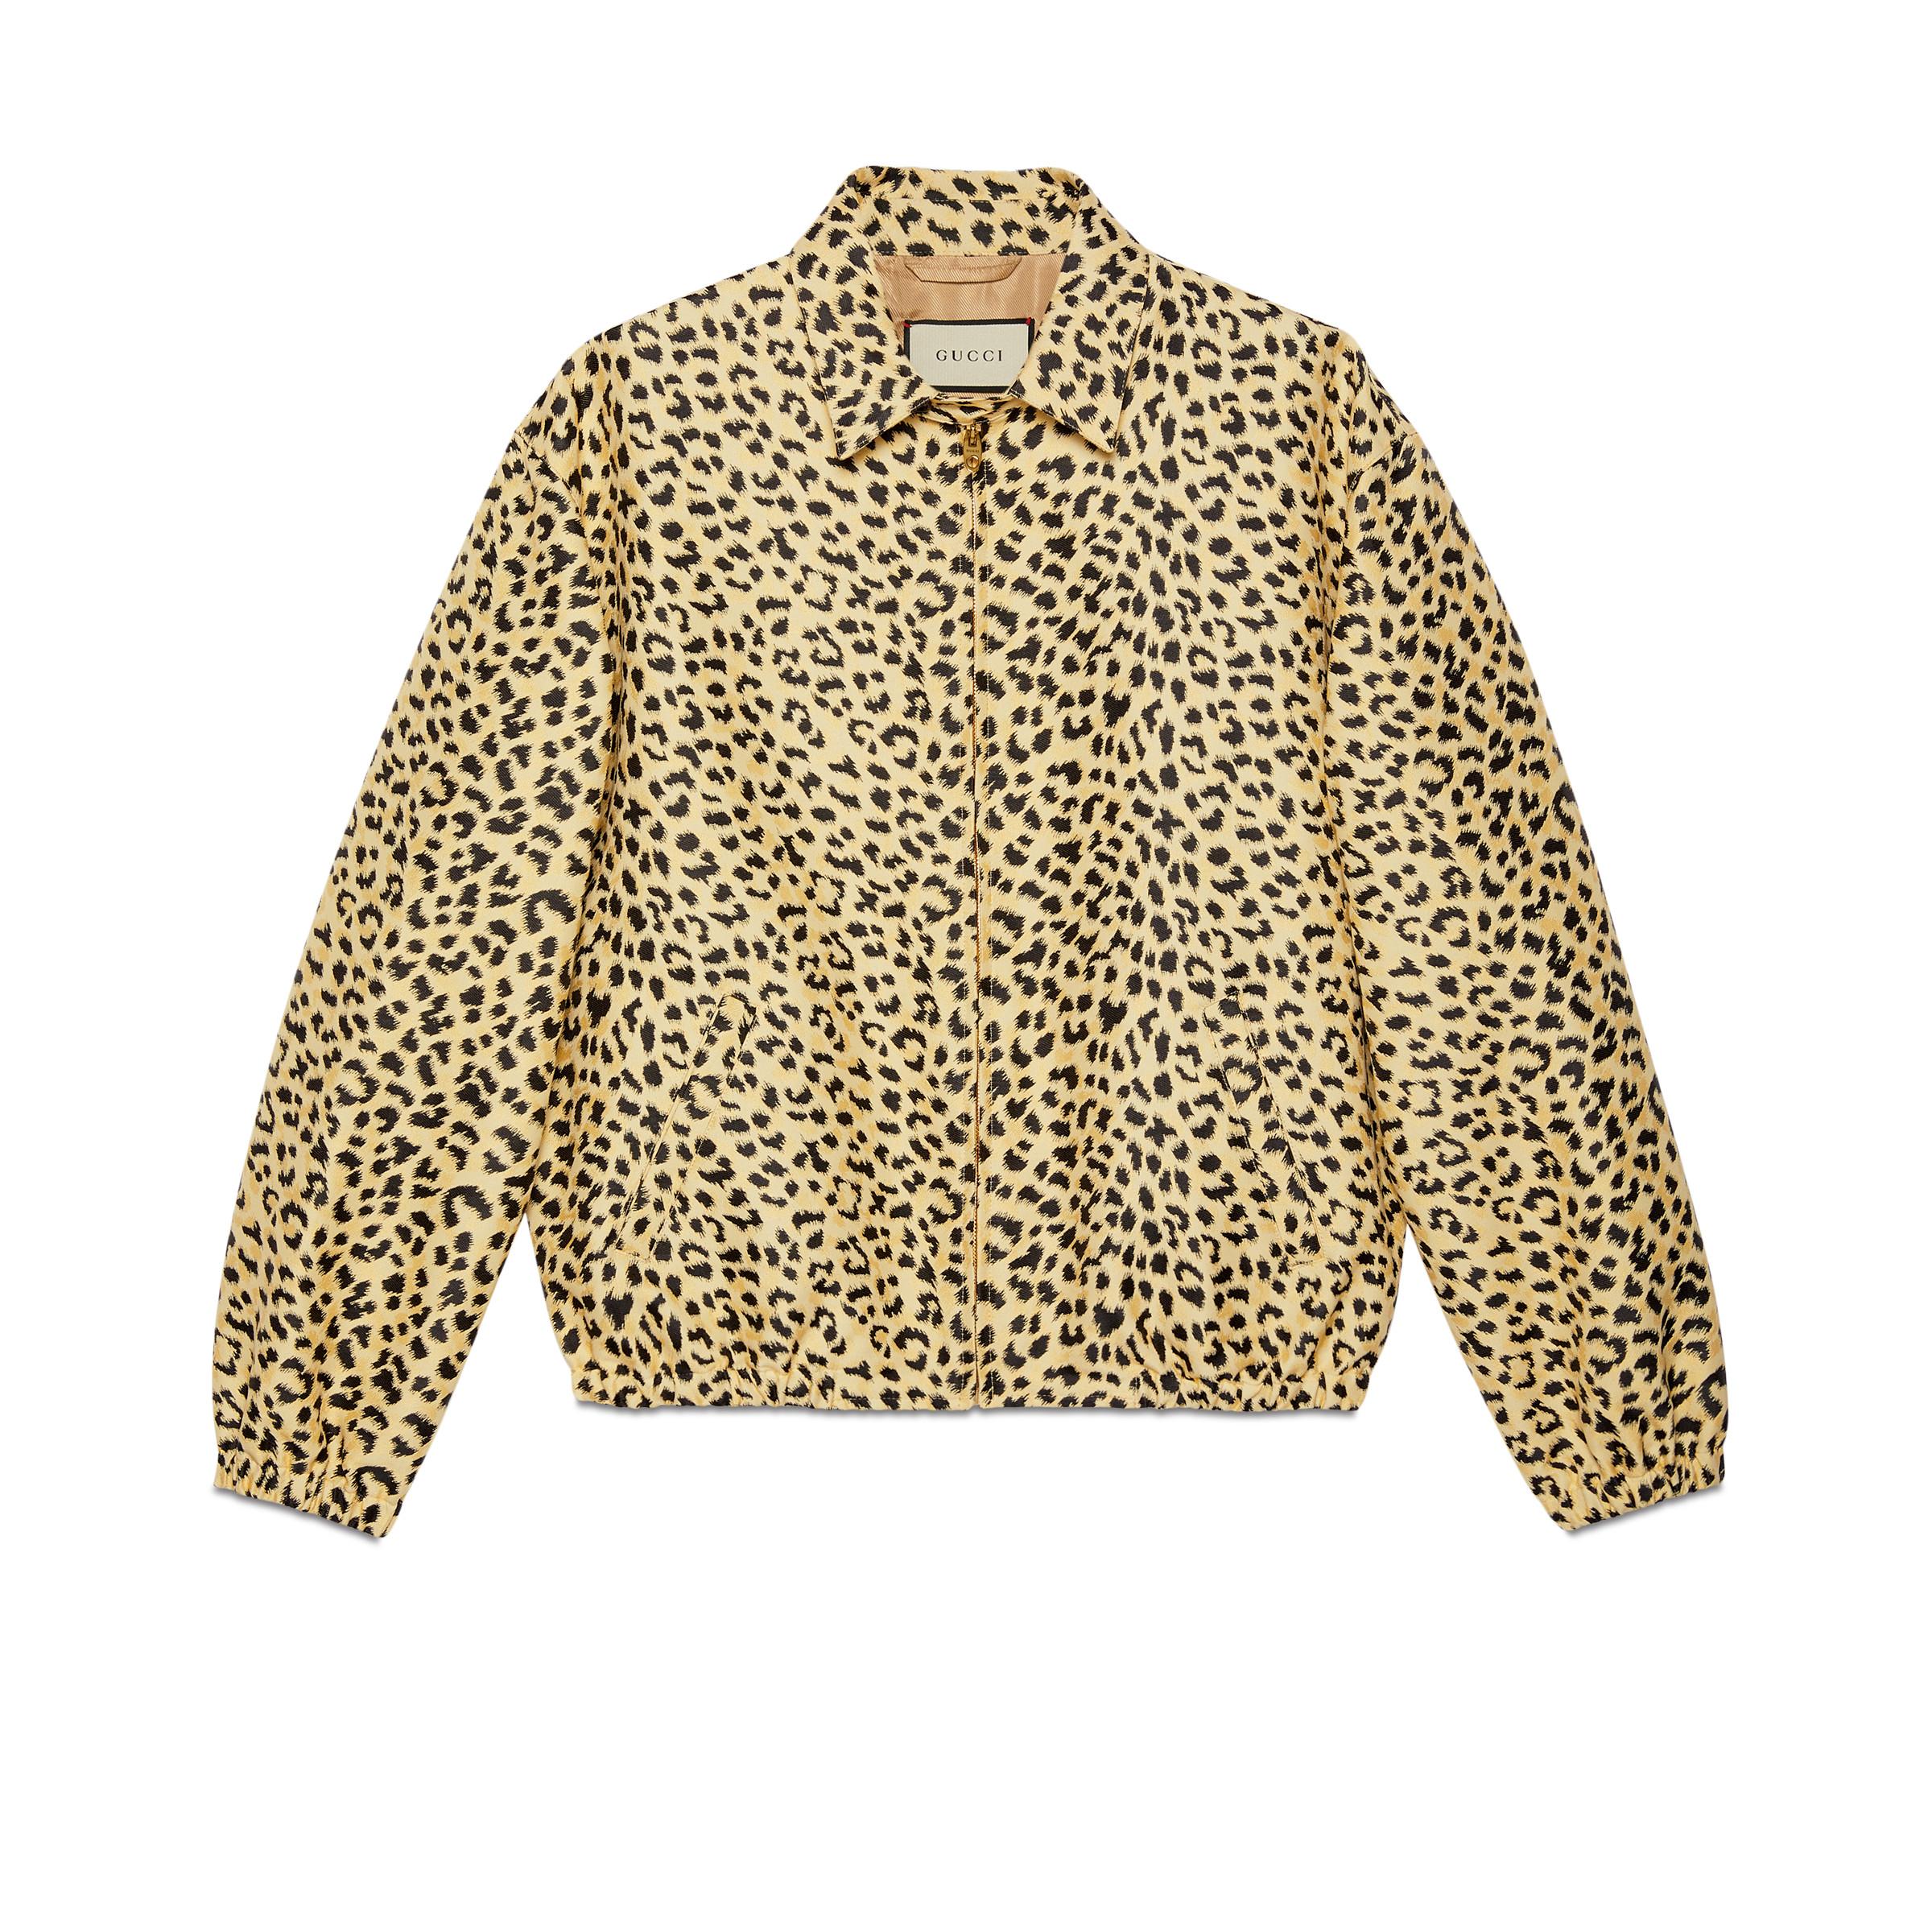 Gucci Cotton Leopard Jacquard Jacket With Label for Men - Lyst